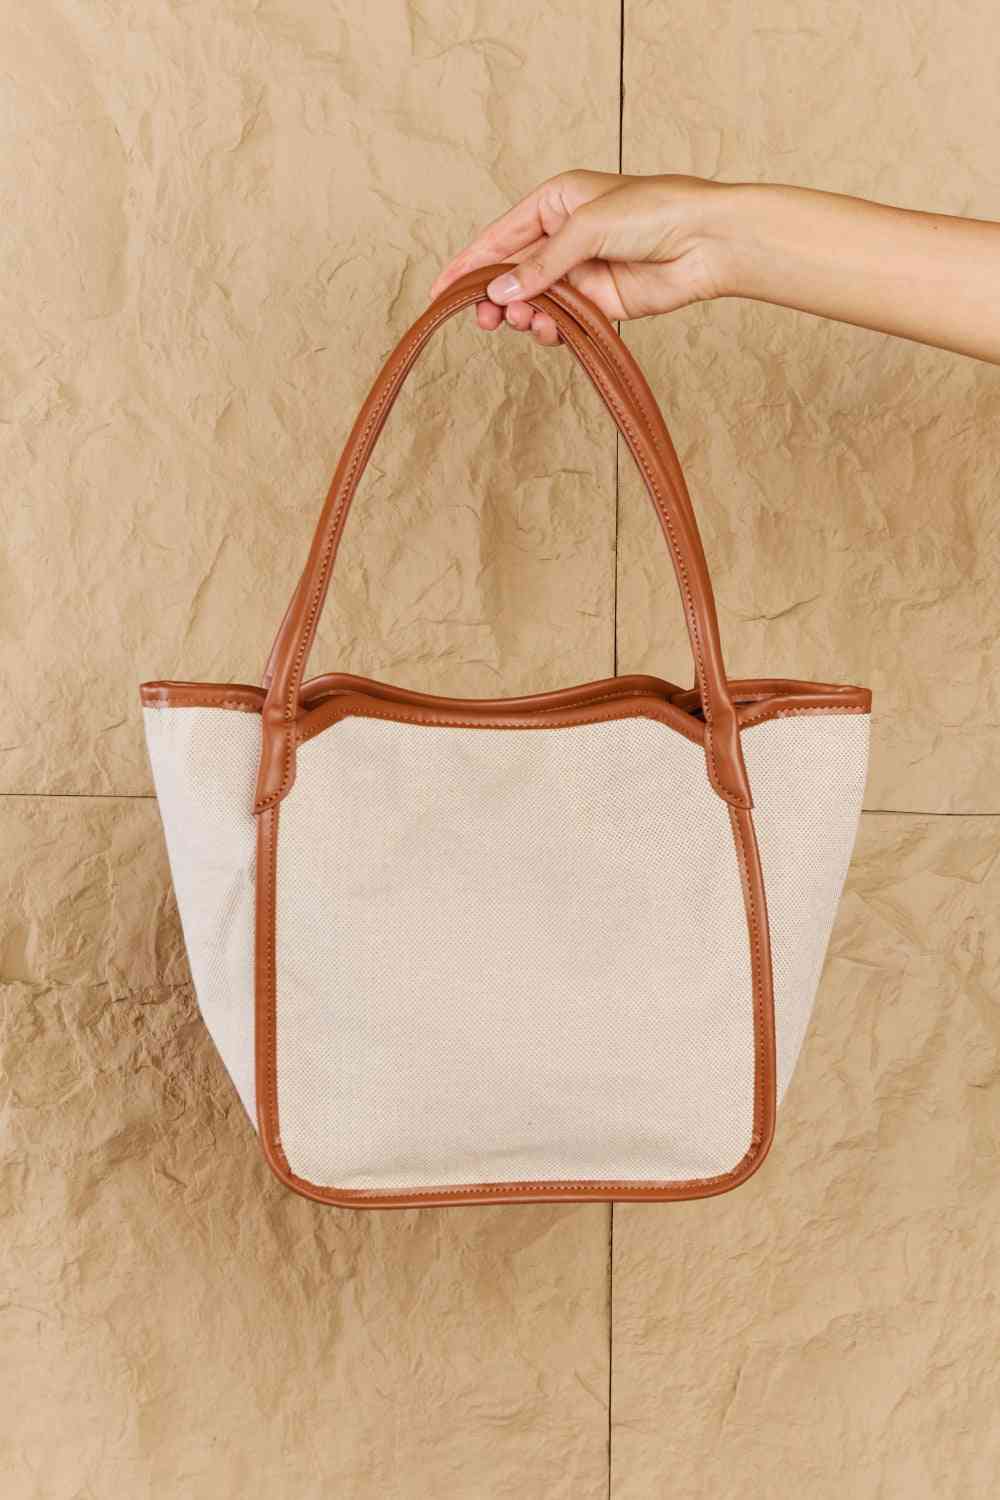 Fame Beach Chic Faux Leather Trim Tote Bag in Ochre Ochre / One Size